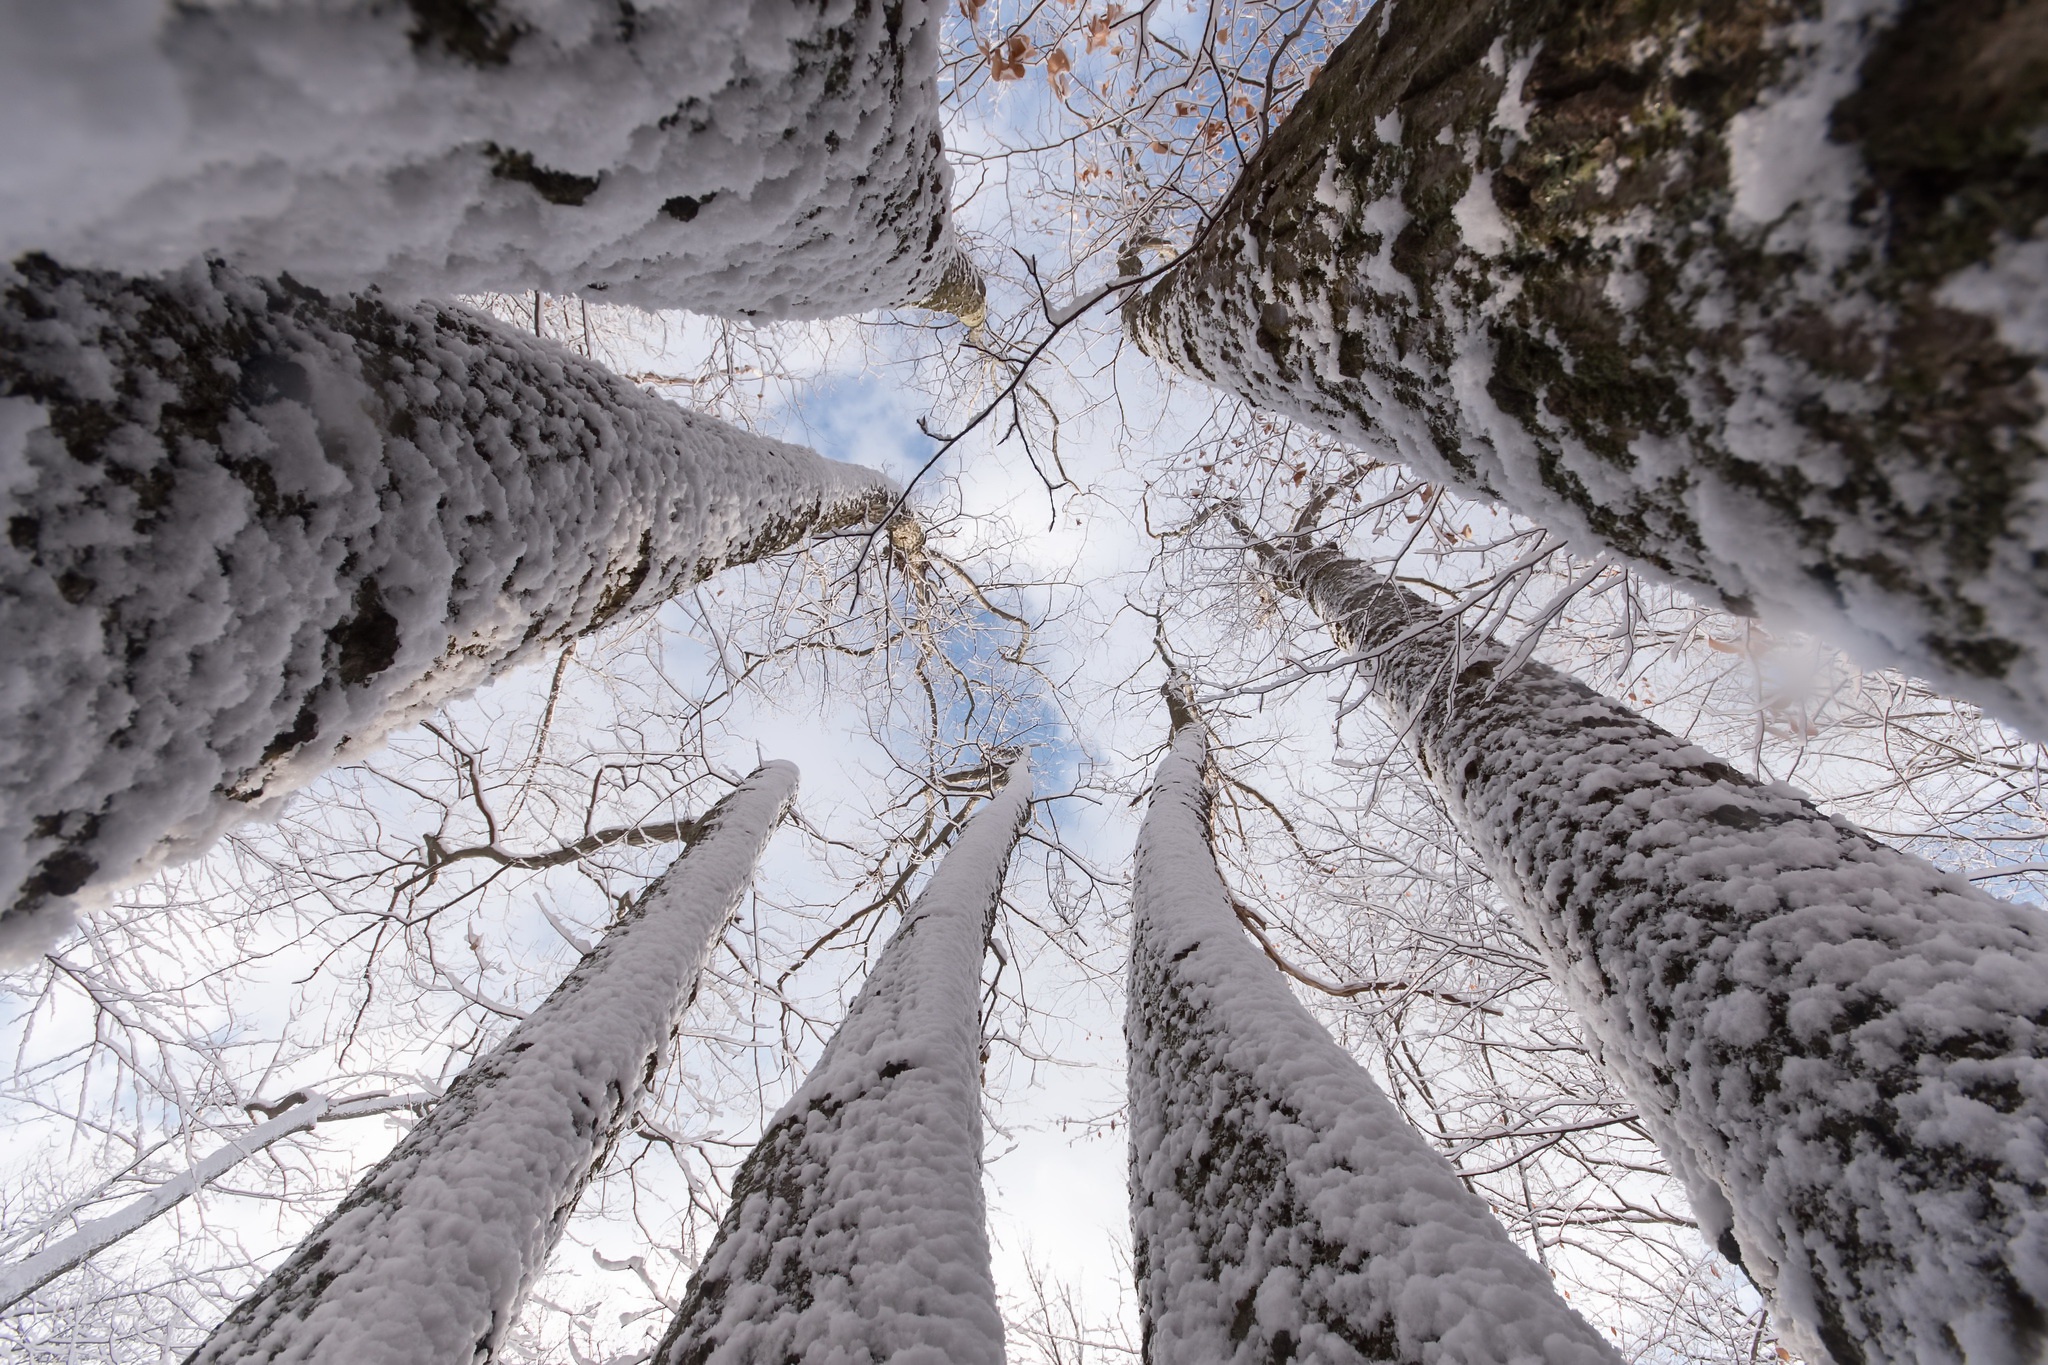 General 2048x1365 worm's eye view trees nature winter snow sky bottom view low-angle snow covered clouds branch